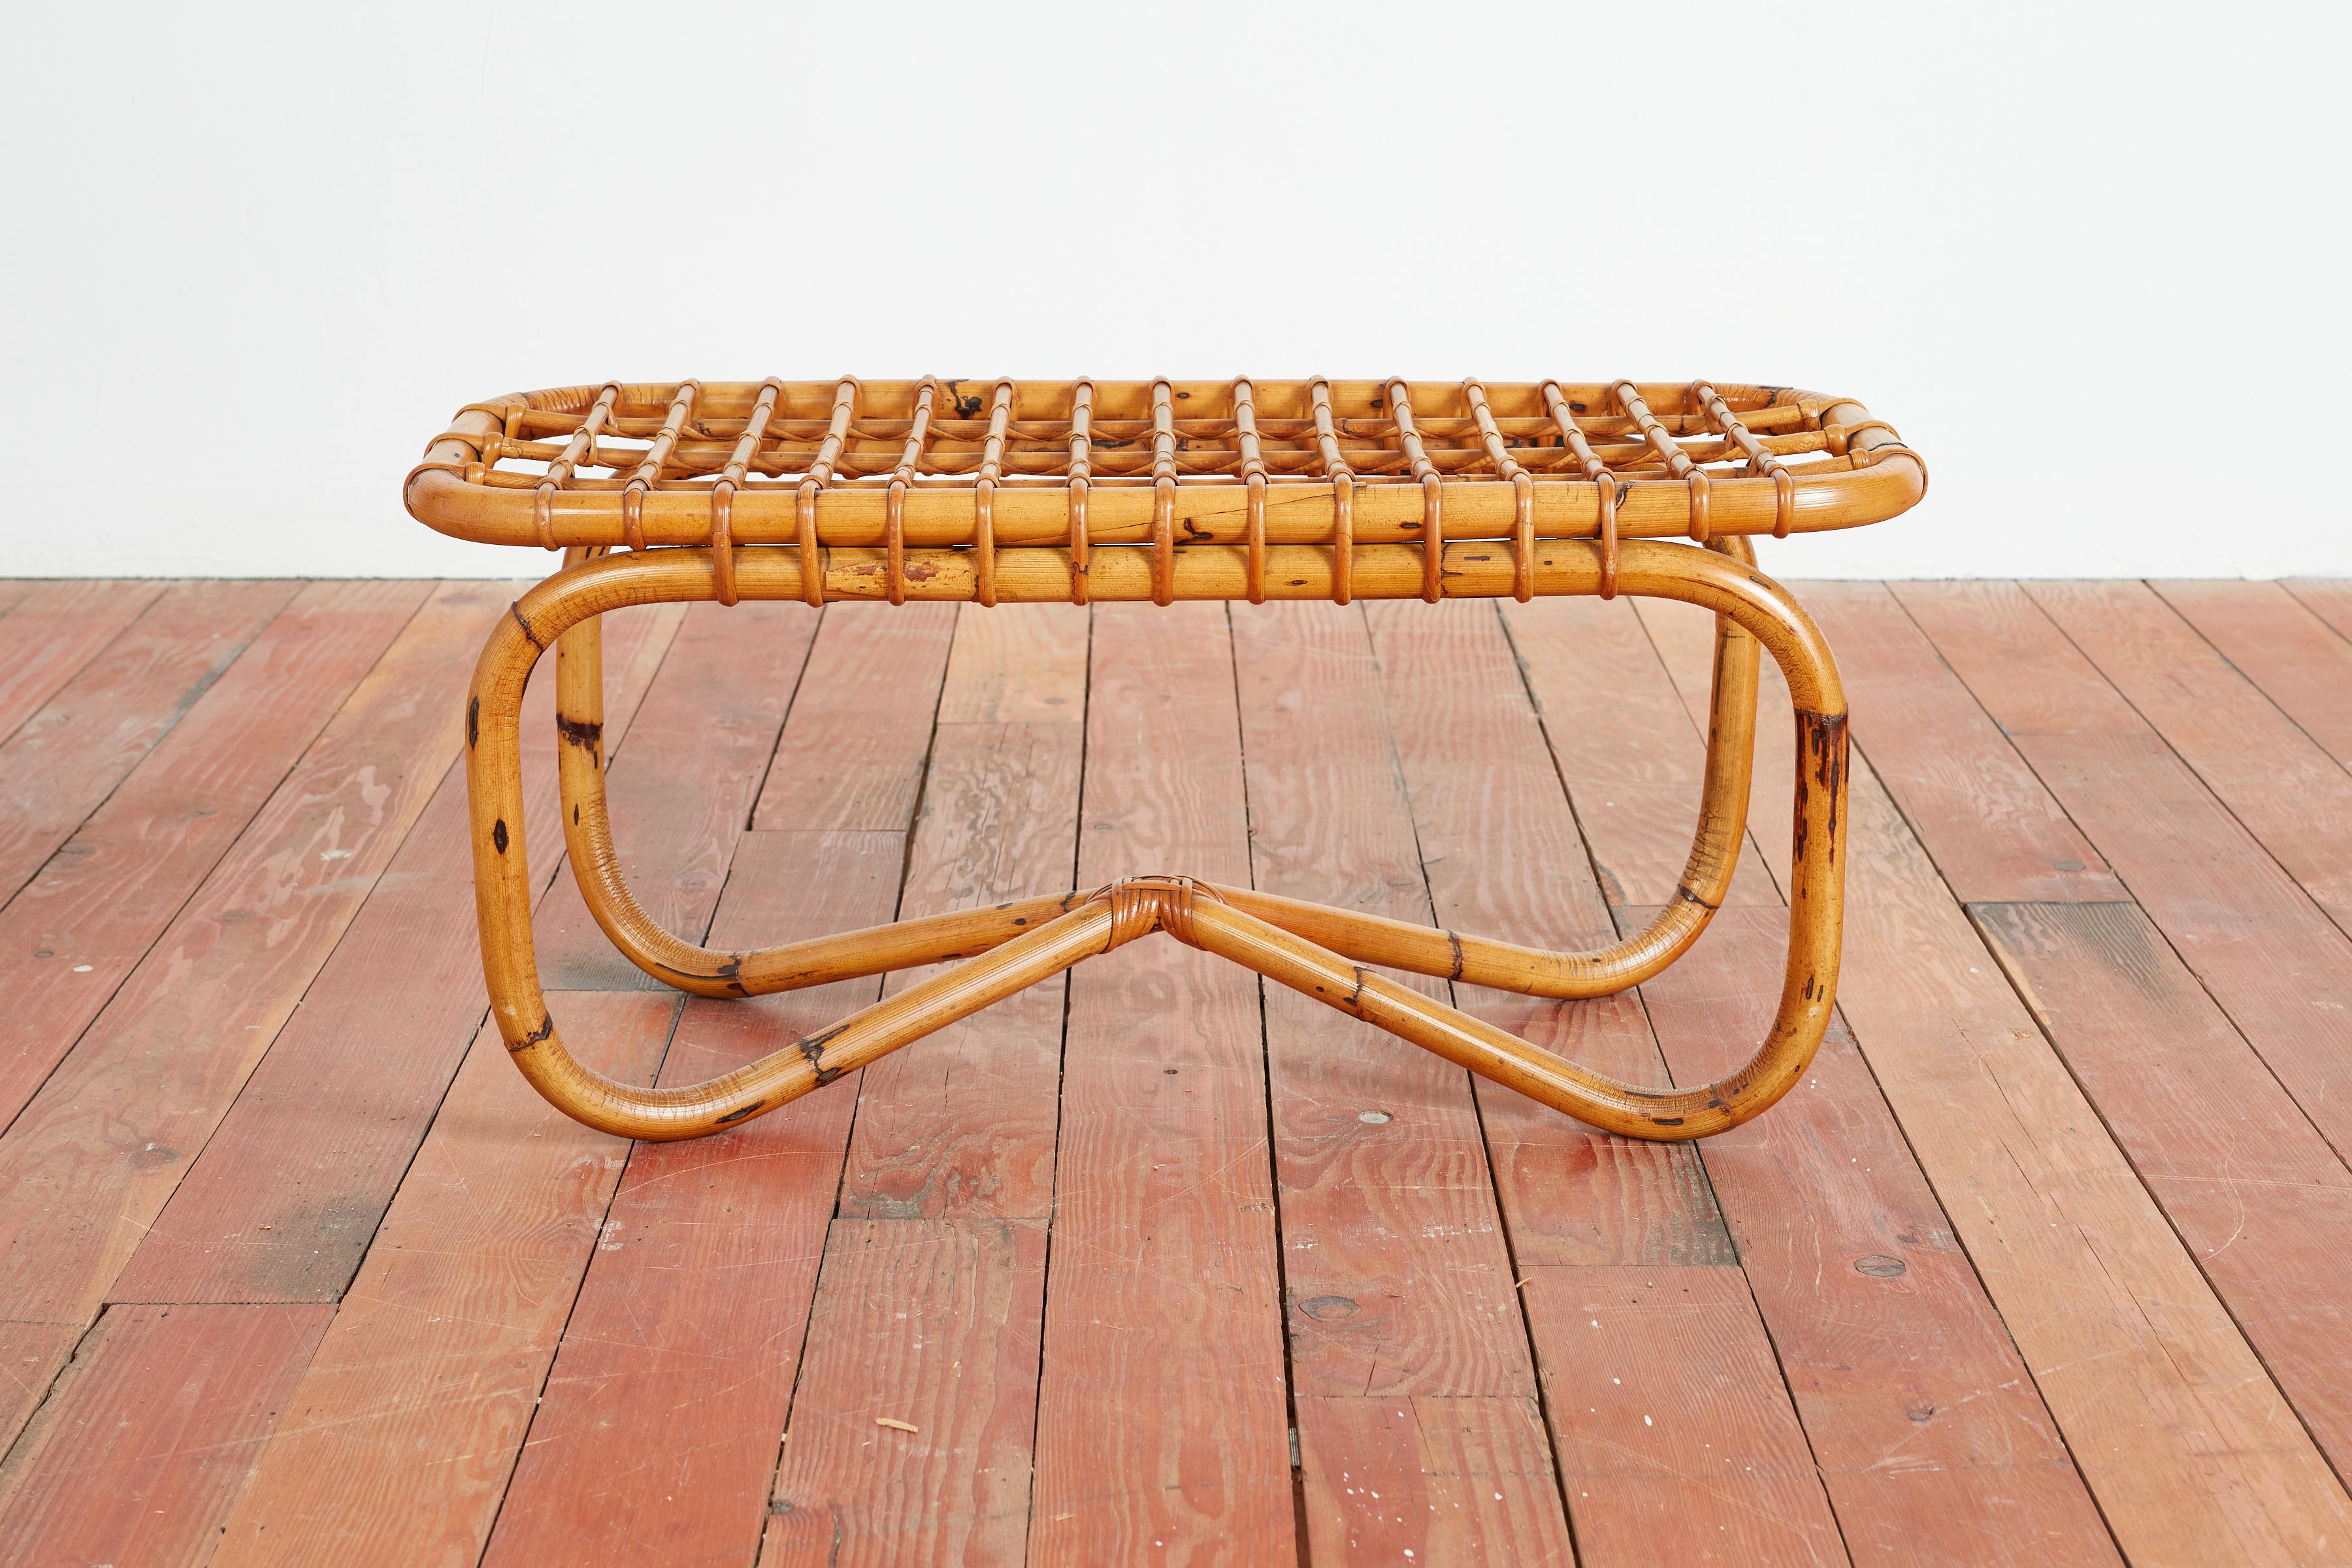 Tito Agnoli bench or coffee table in bamboo grid shape and curved loop legs.
Italy - 1950s